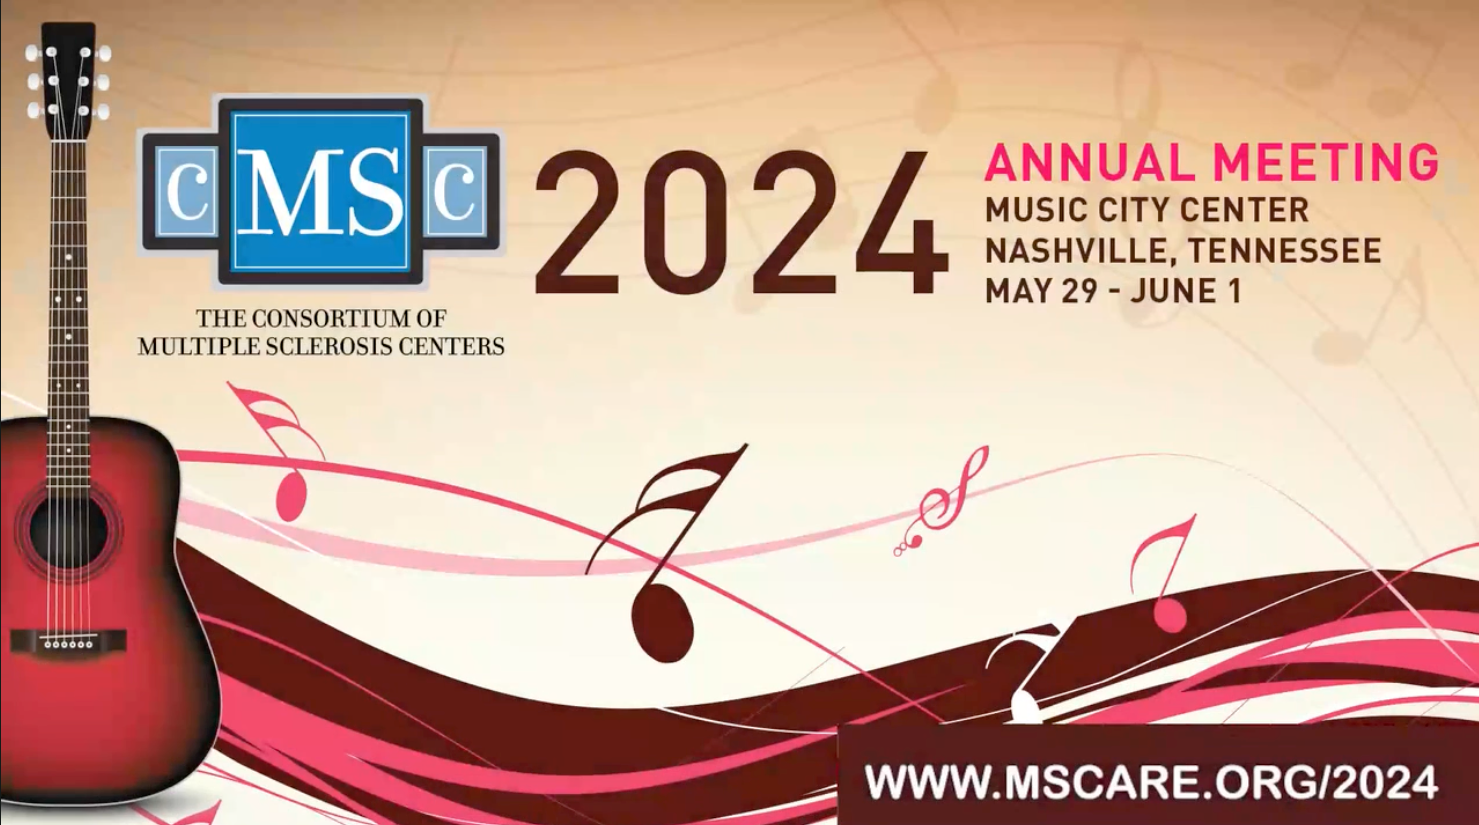 CMSC 2024: What to Expect From This Year's Annual Meeting